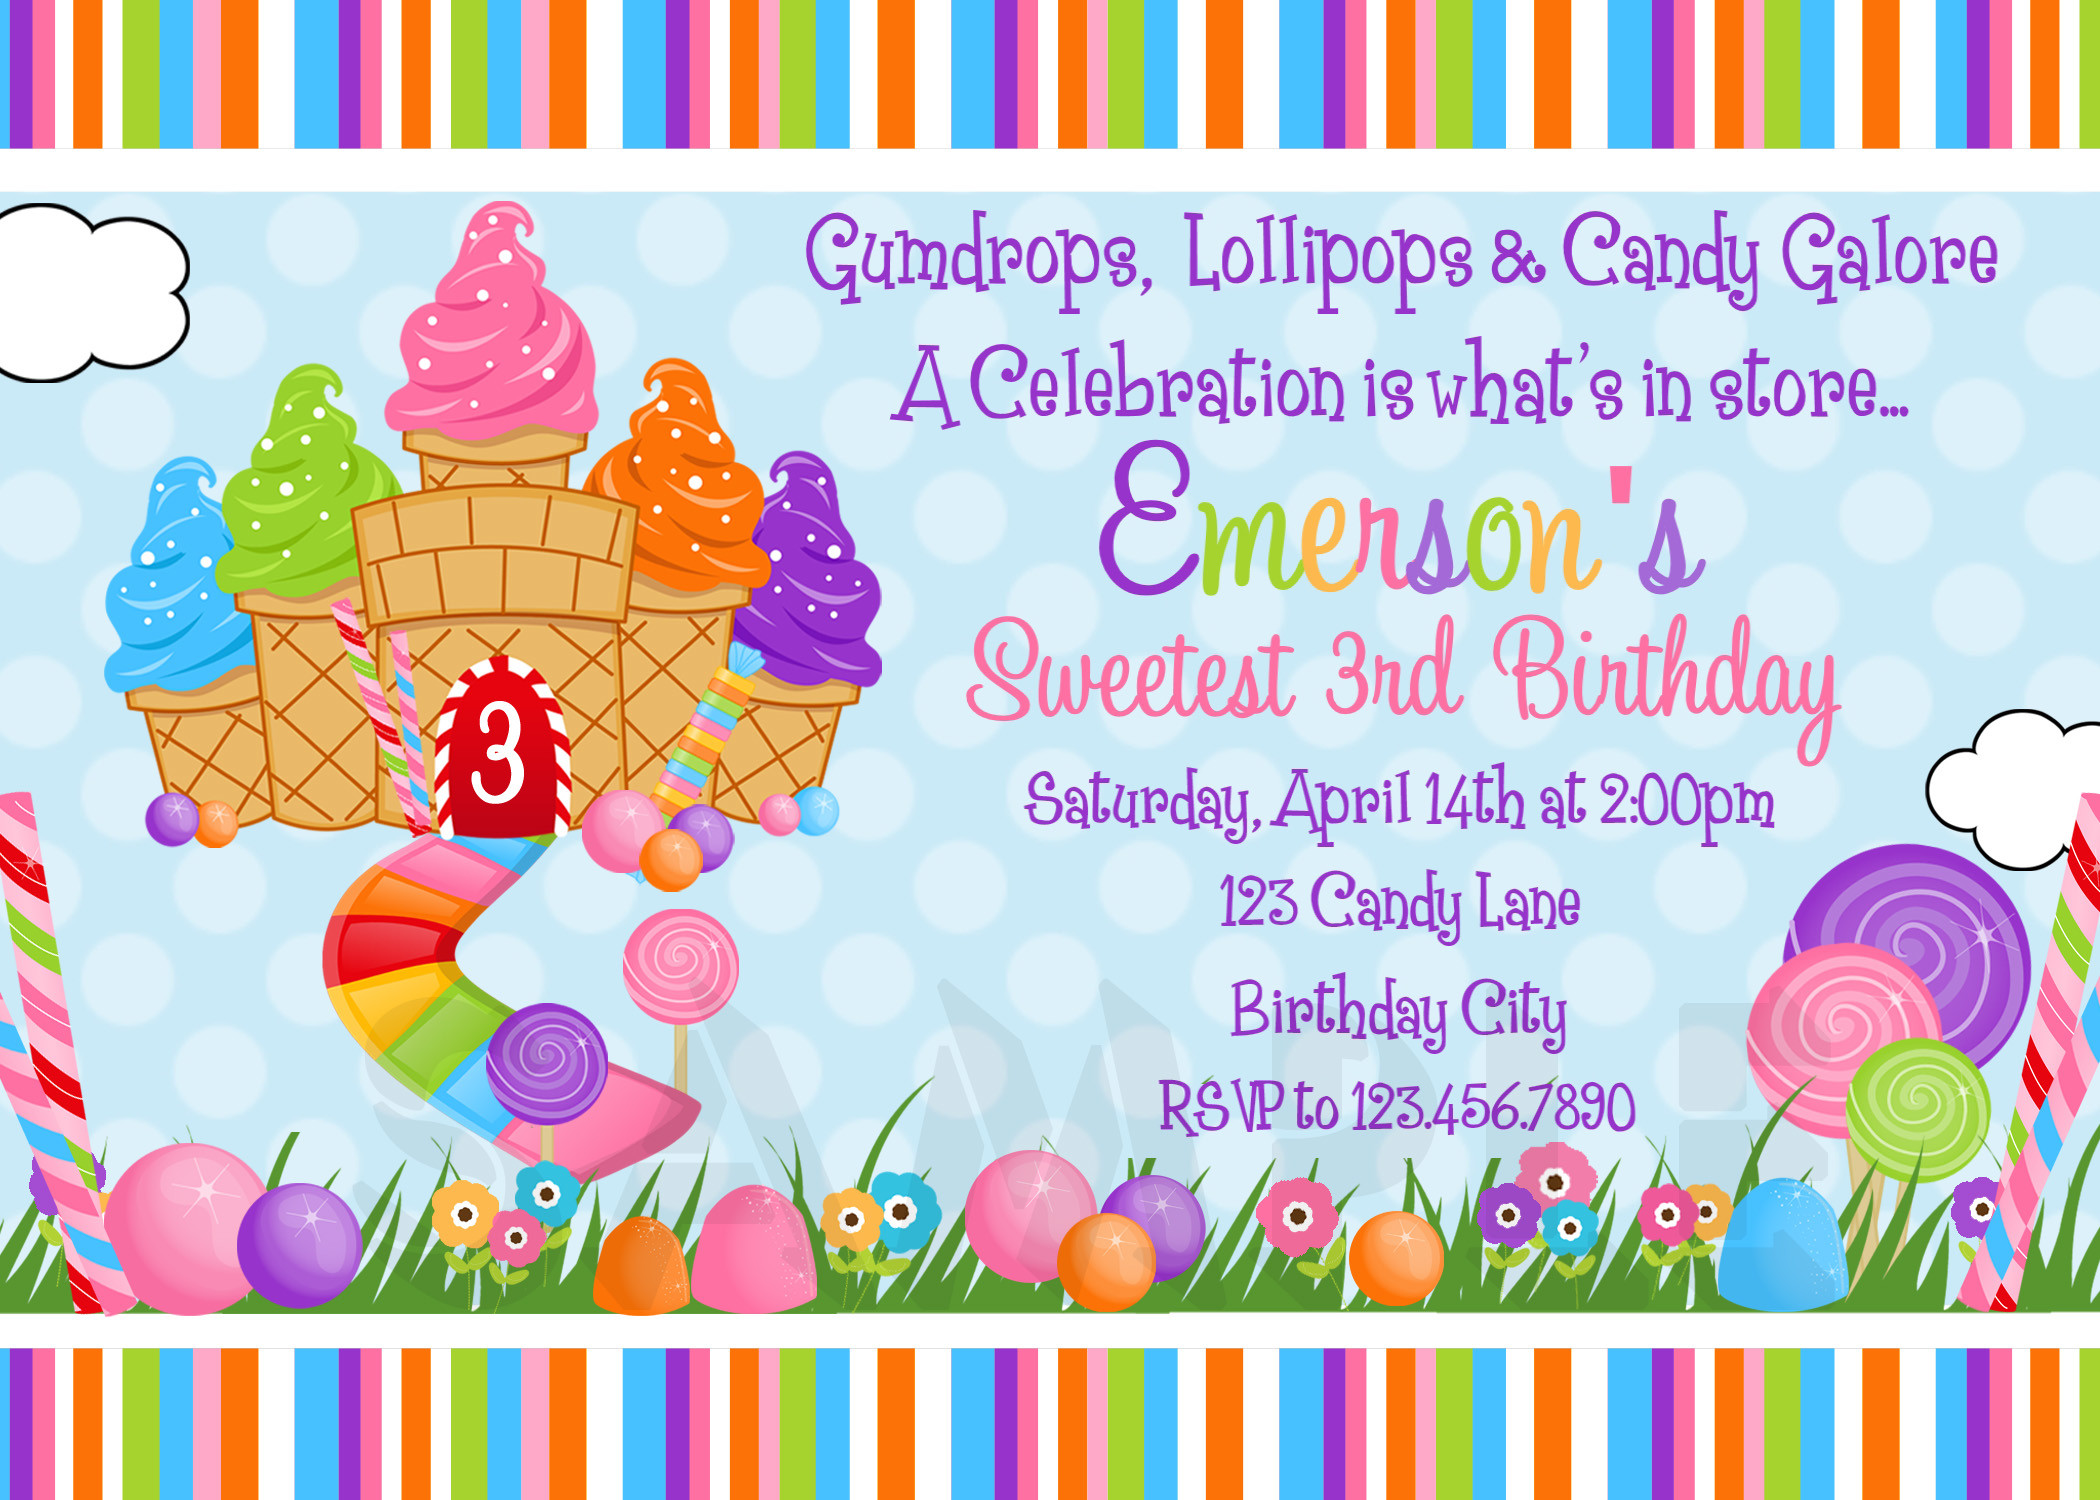 2100x1500 Candyland Party Invitations With Magnificent Template Party Invitation  Cards Invitation Card Design Using A Unique Design 4 - source pÑxabay.cÐ¾m